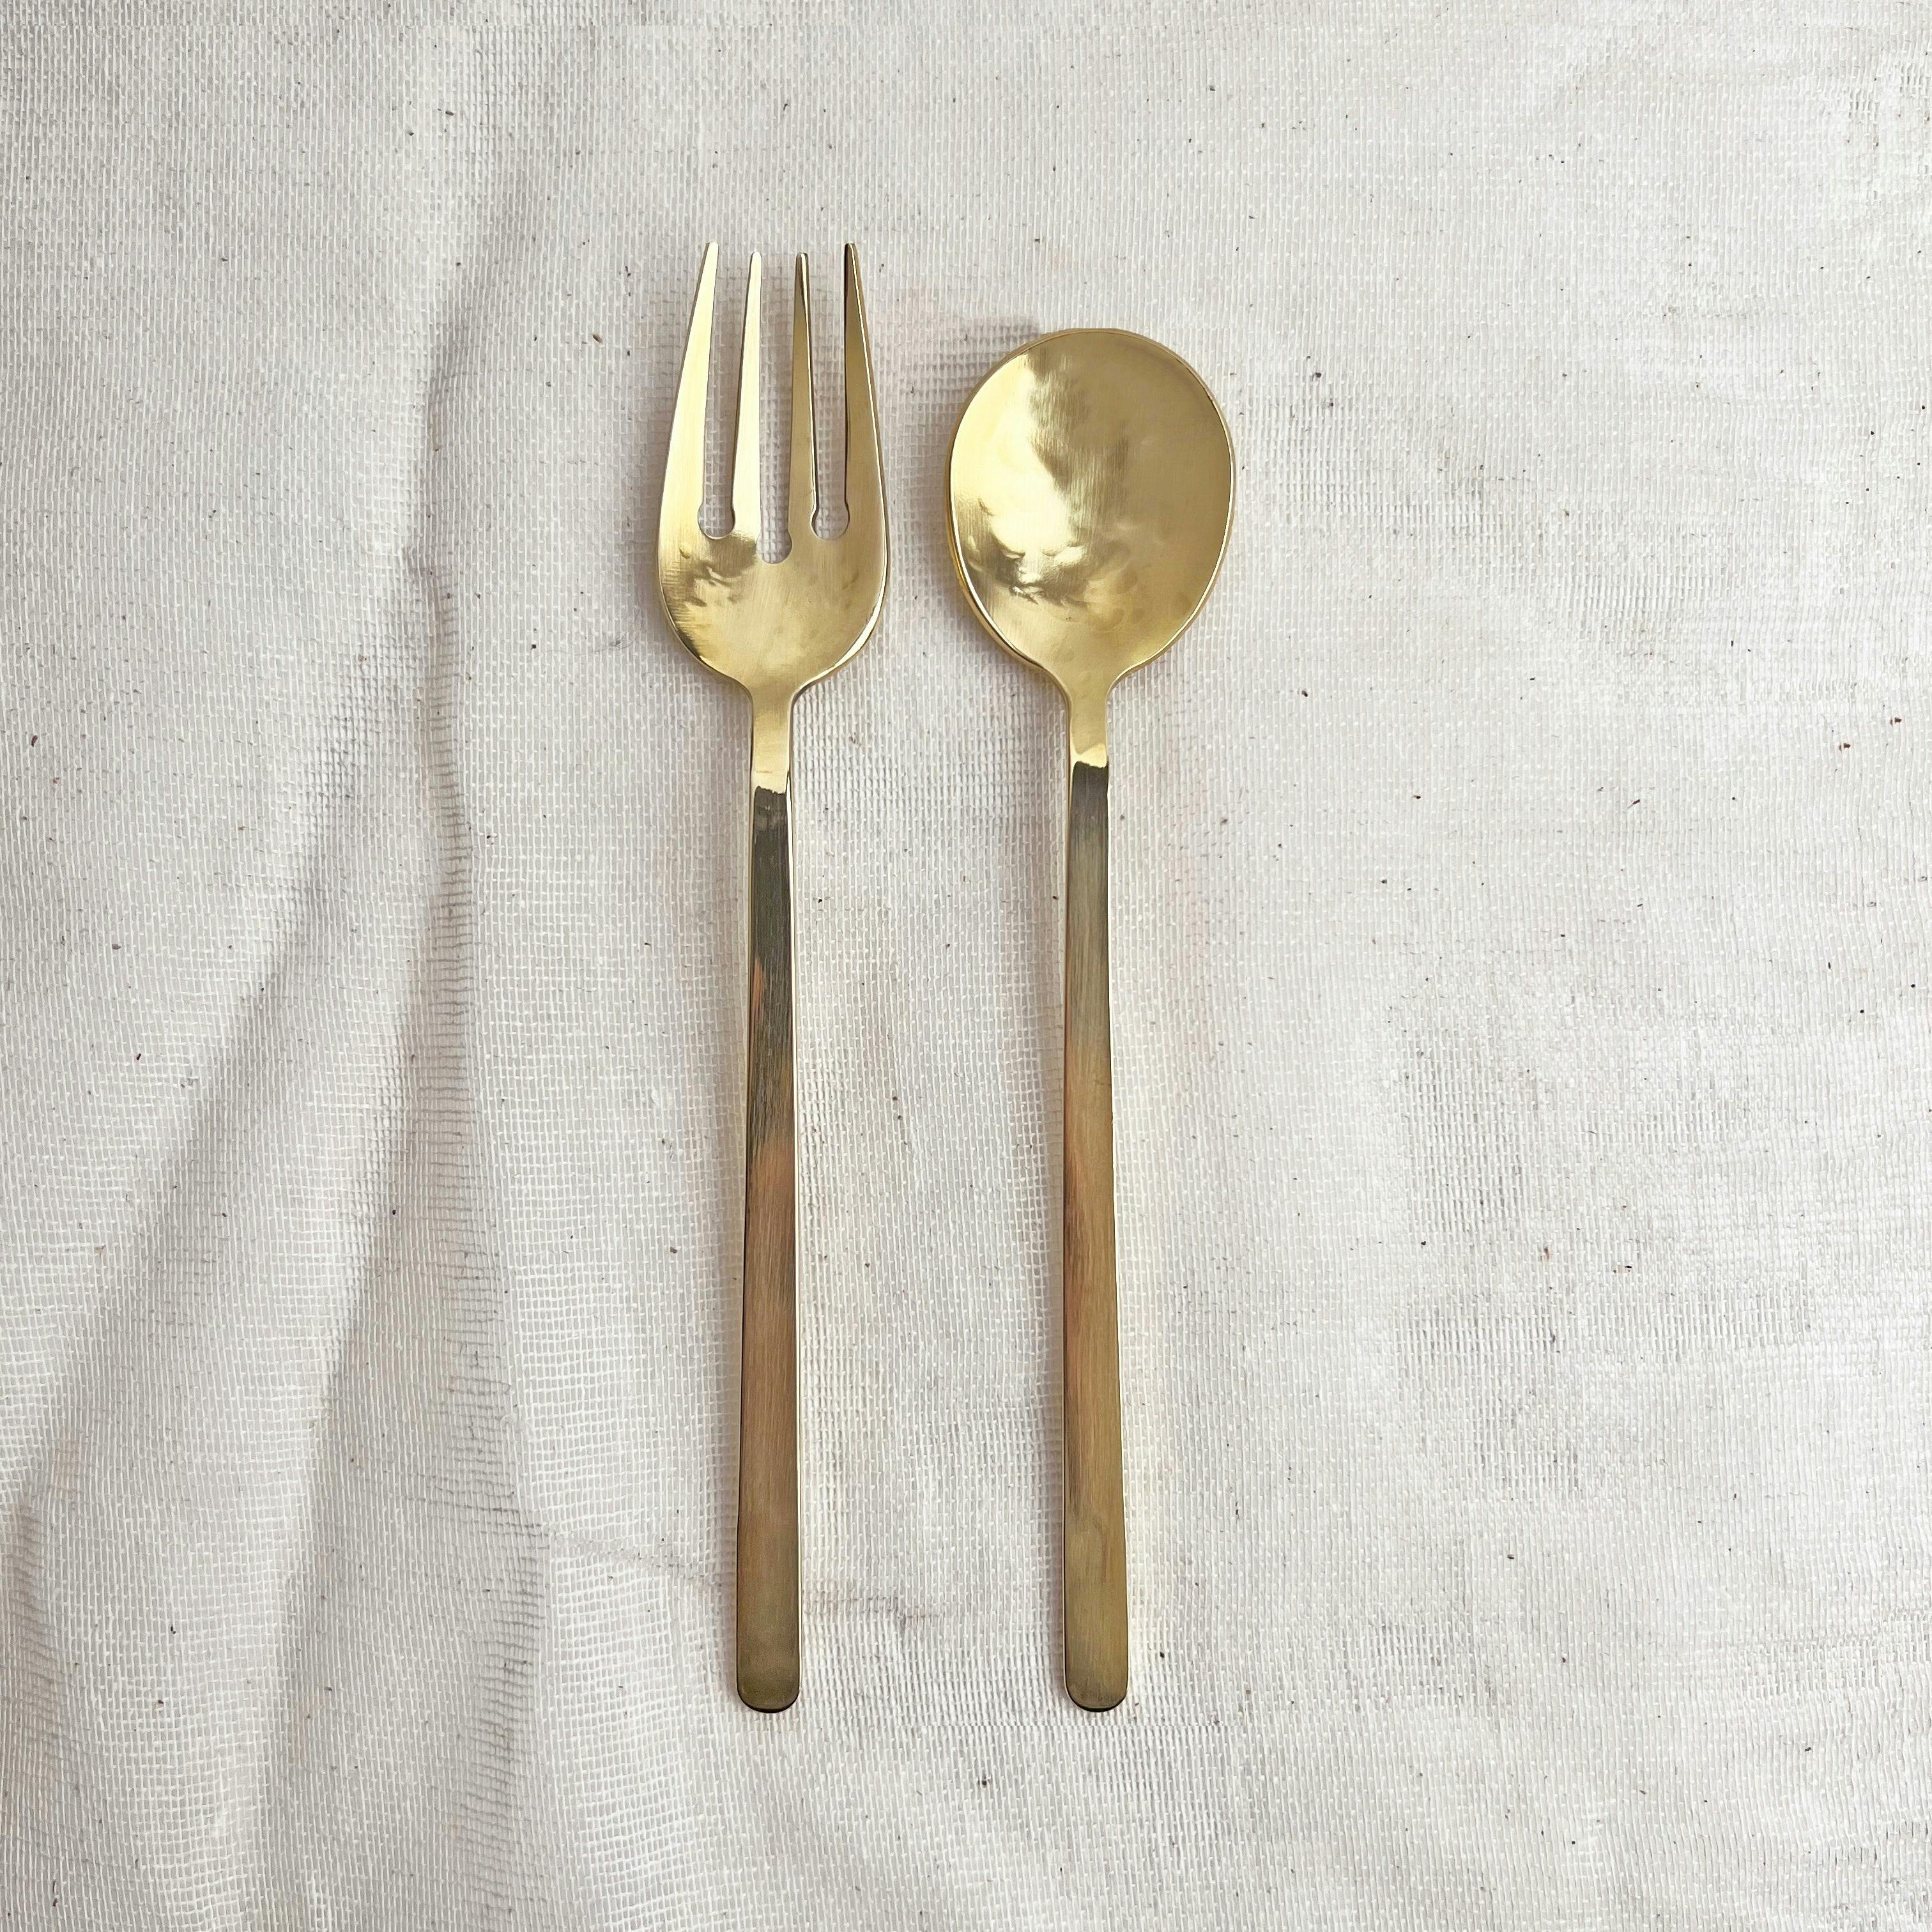 Pure Brass Cutlery Set, a product by Midori Collective